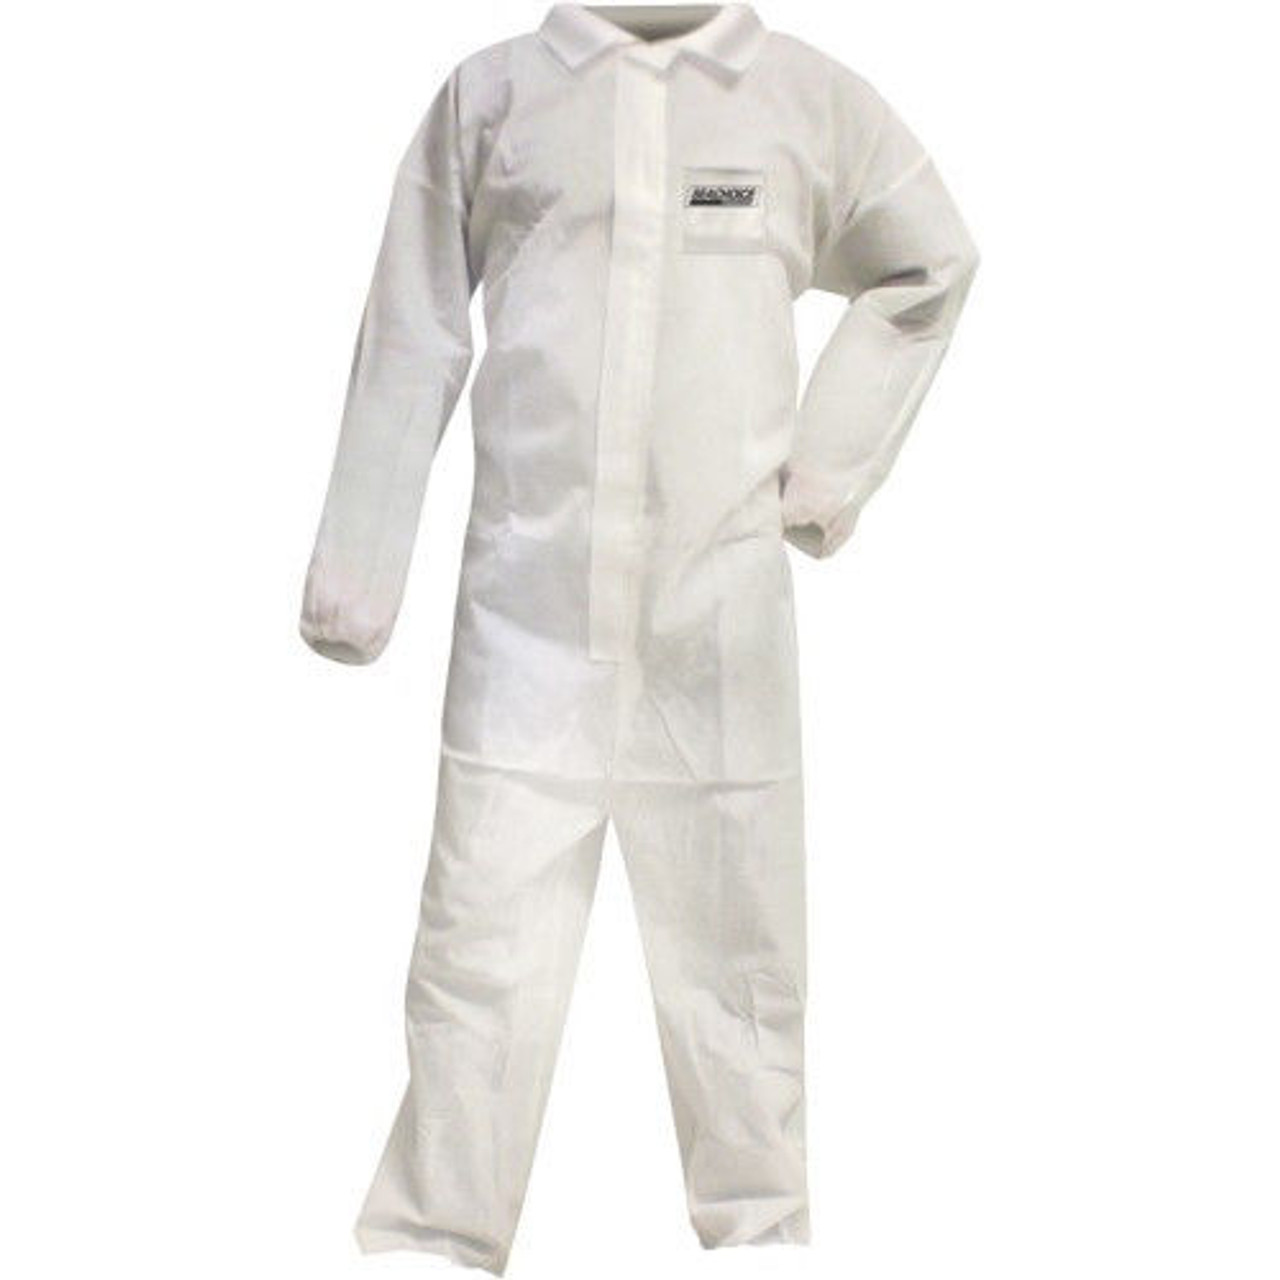 Seachoice Microporous Fabric Disposable Coveralls with Pockets - Size XX Large